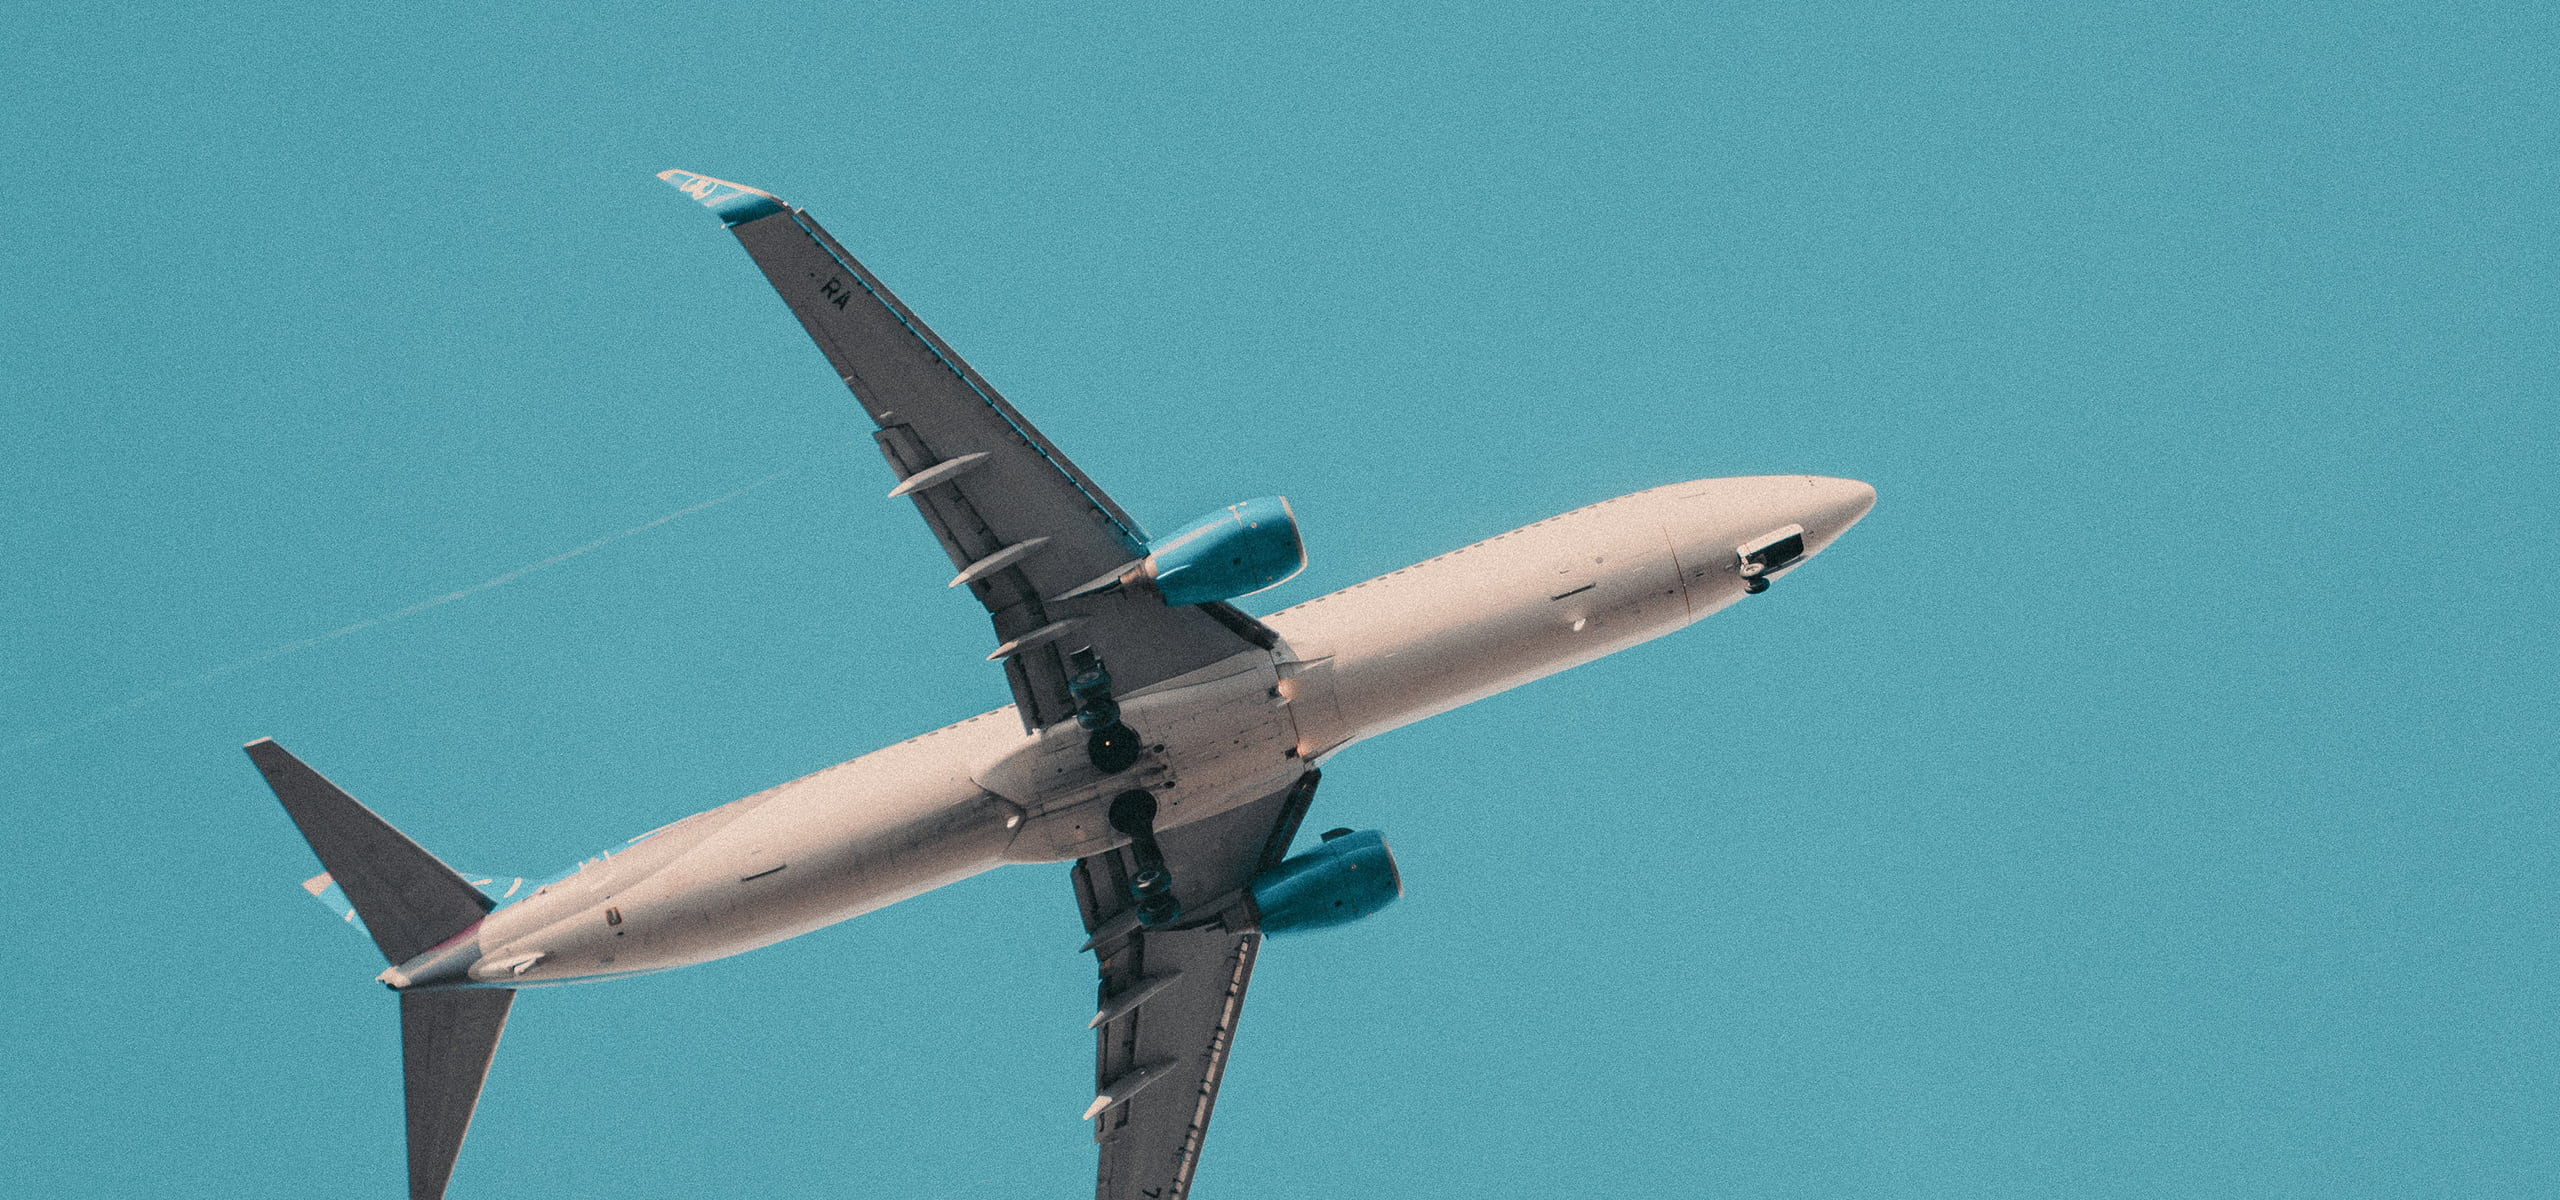 High-altitude aircraft flying towards a sustainable future, symbolizing the role of Sustainable Aviation Fuel (SAF) in reducing carbon emissions. Explore our whitepaper 'Fueling the Future of Aviation' for insights into SAF and alternative propulsion technologies.